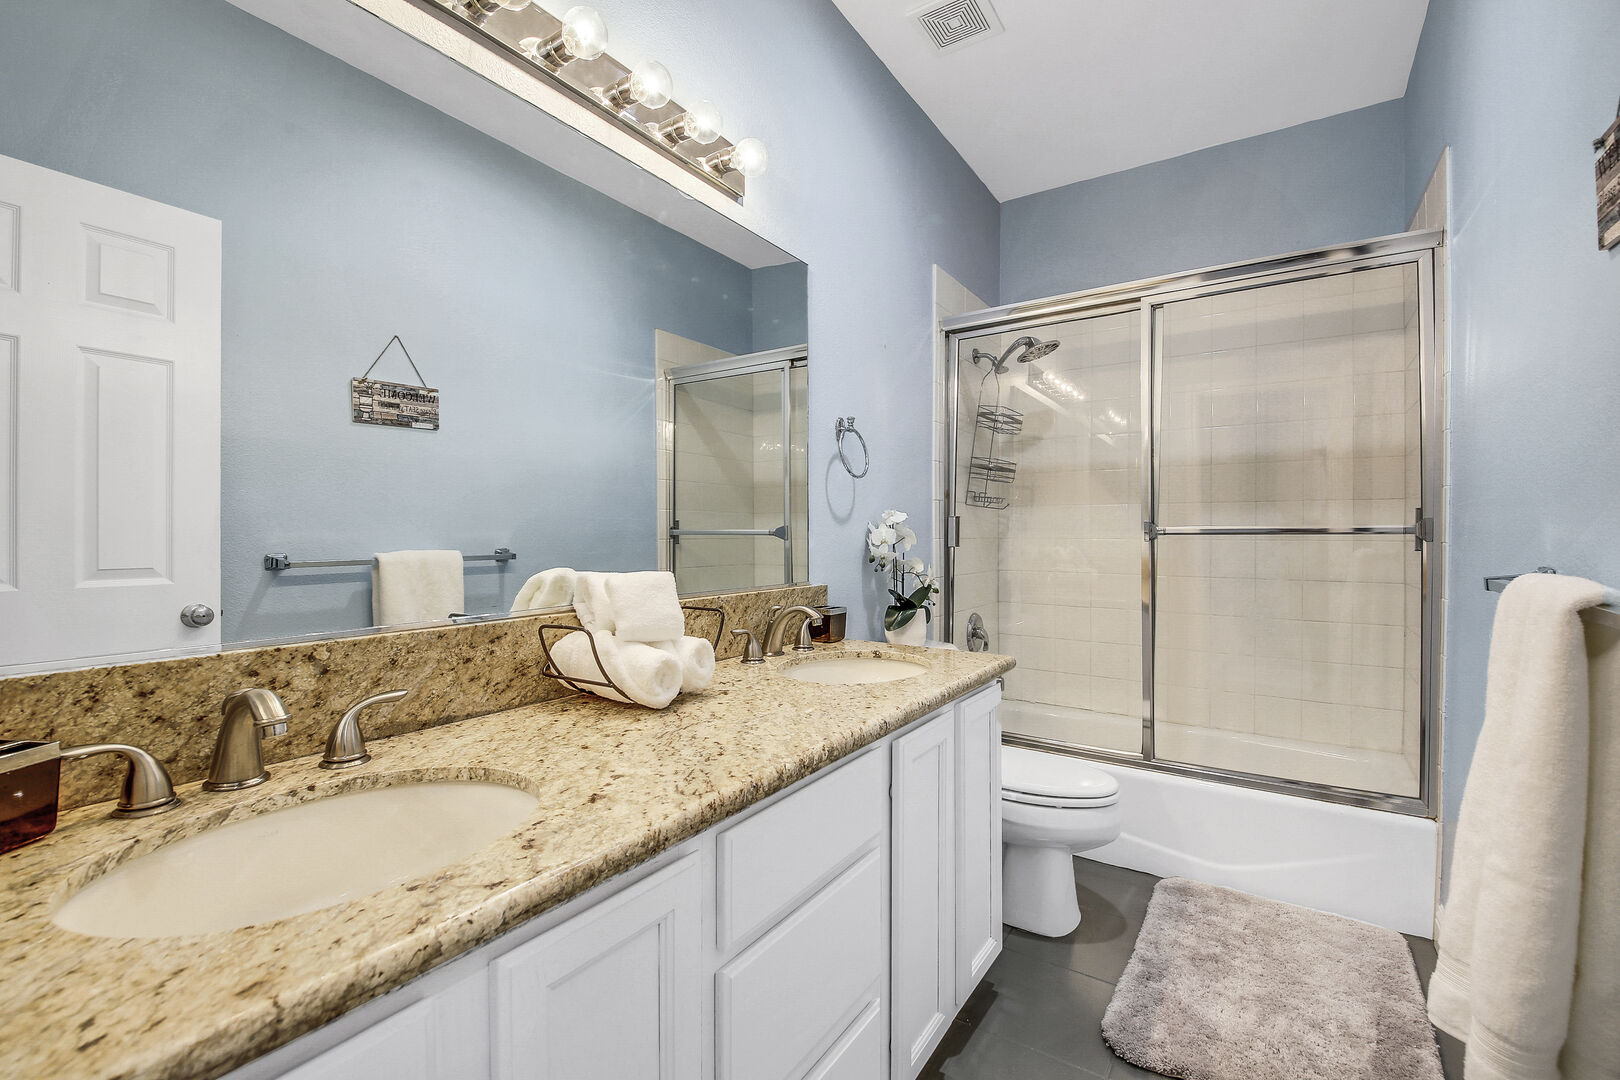 The upstairs hallway bathroom is located next to Bedroom 2, features a bathtub and shower combo and double vanity sinks.